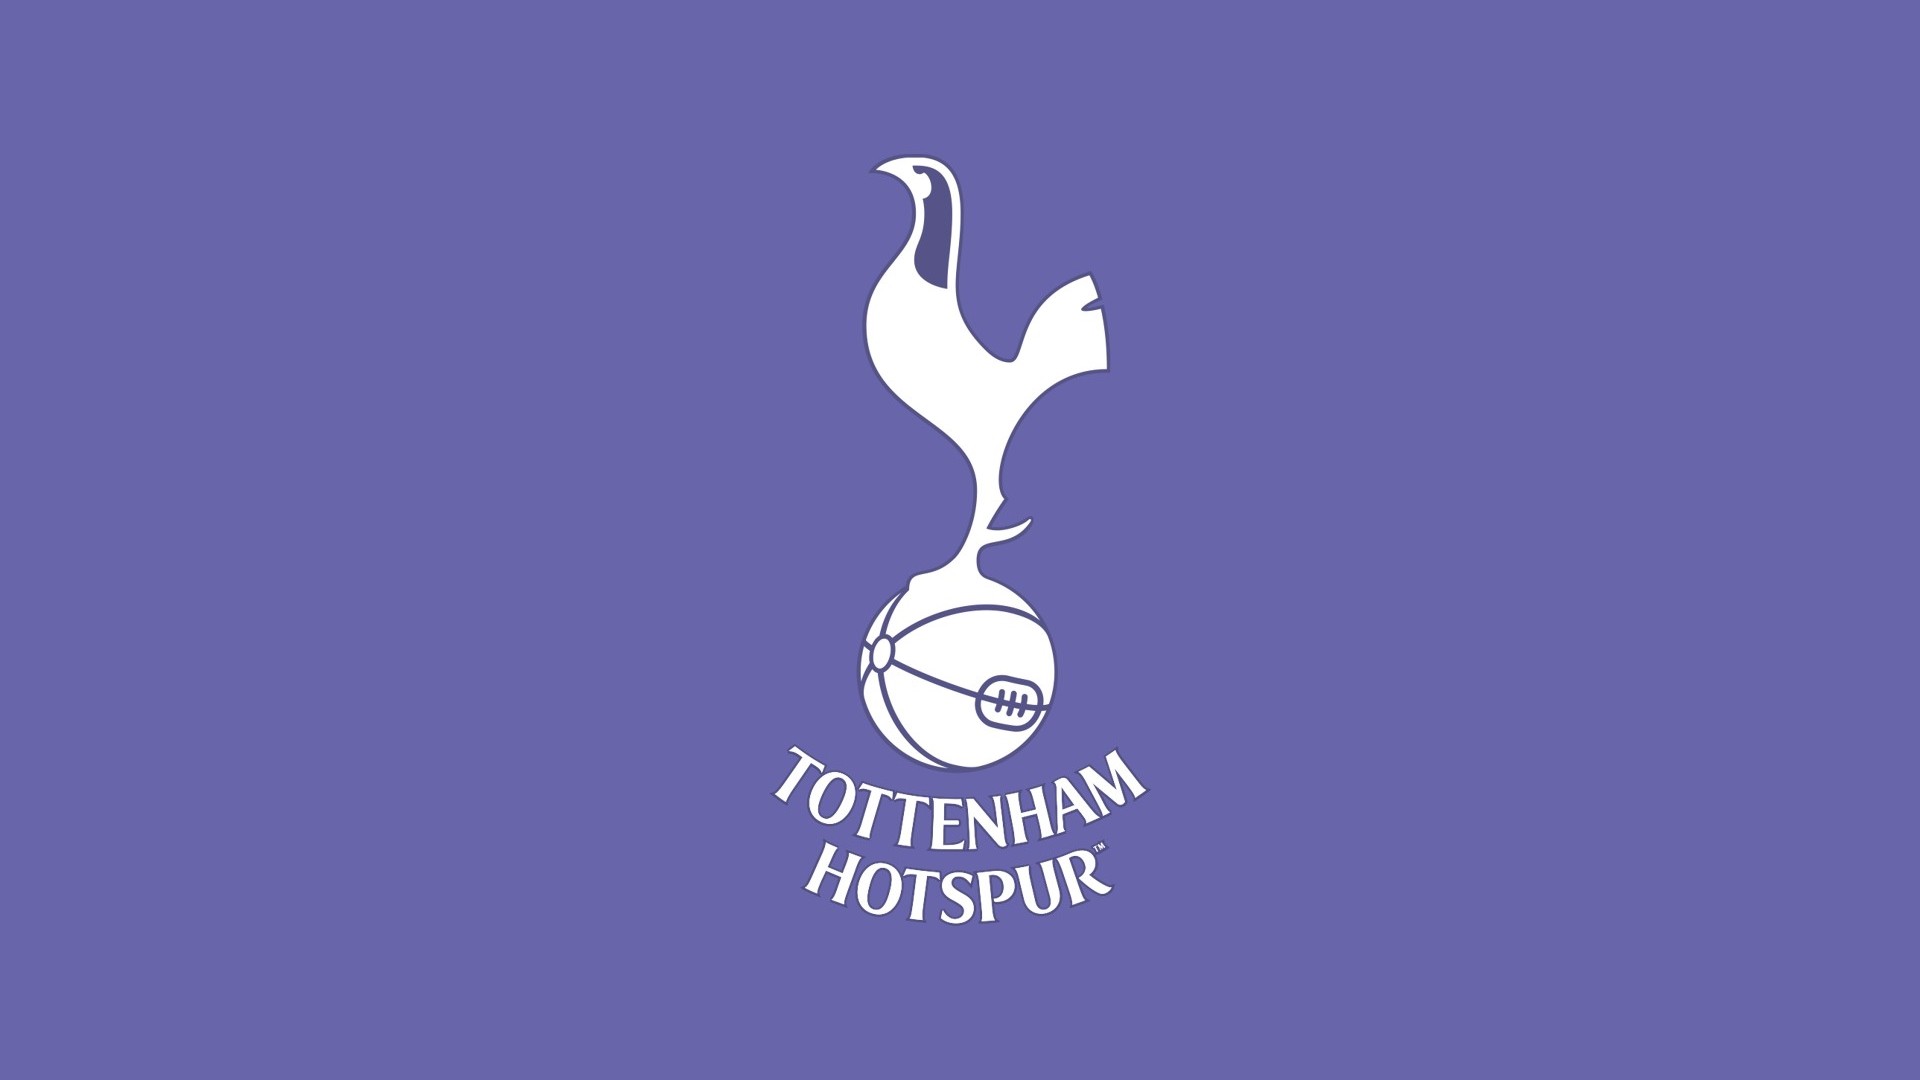 HD Wallpaper Tottenham Hotspur With high-resolution 1920X1080 pixel. You can use this wallpaper for your Desktop Computer Backgrounds, Mac Wallpapers, Android Lock screen or iPhone Screensavers and another smartphone device